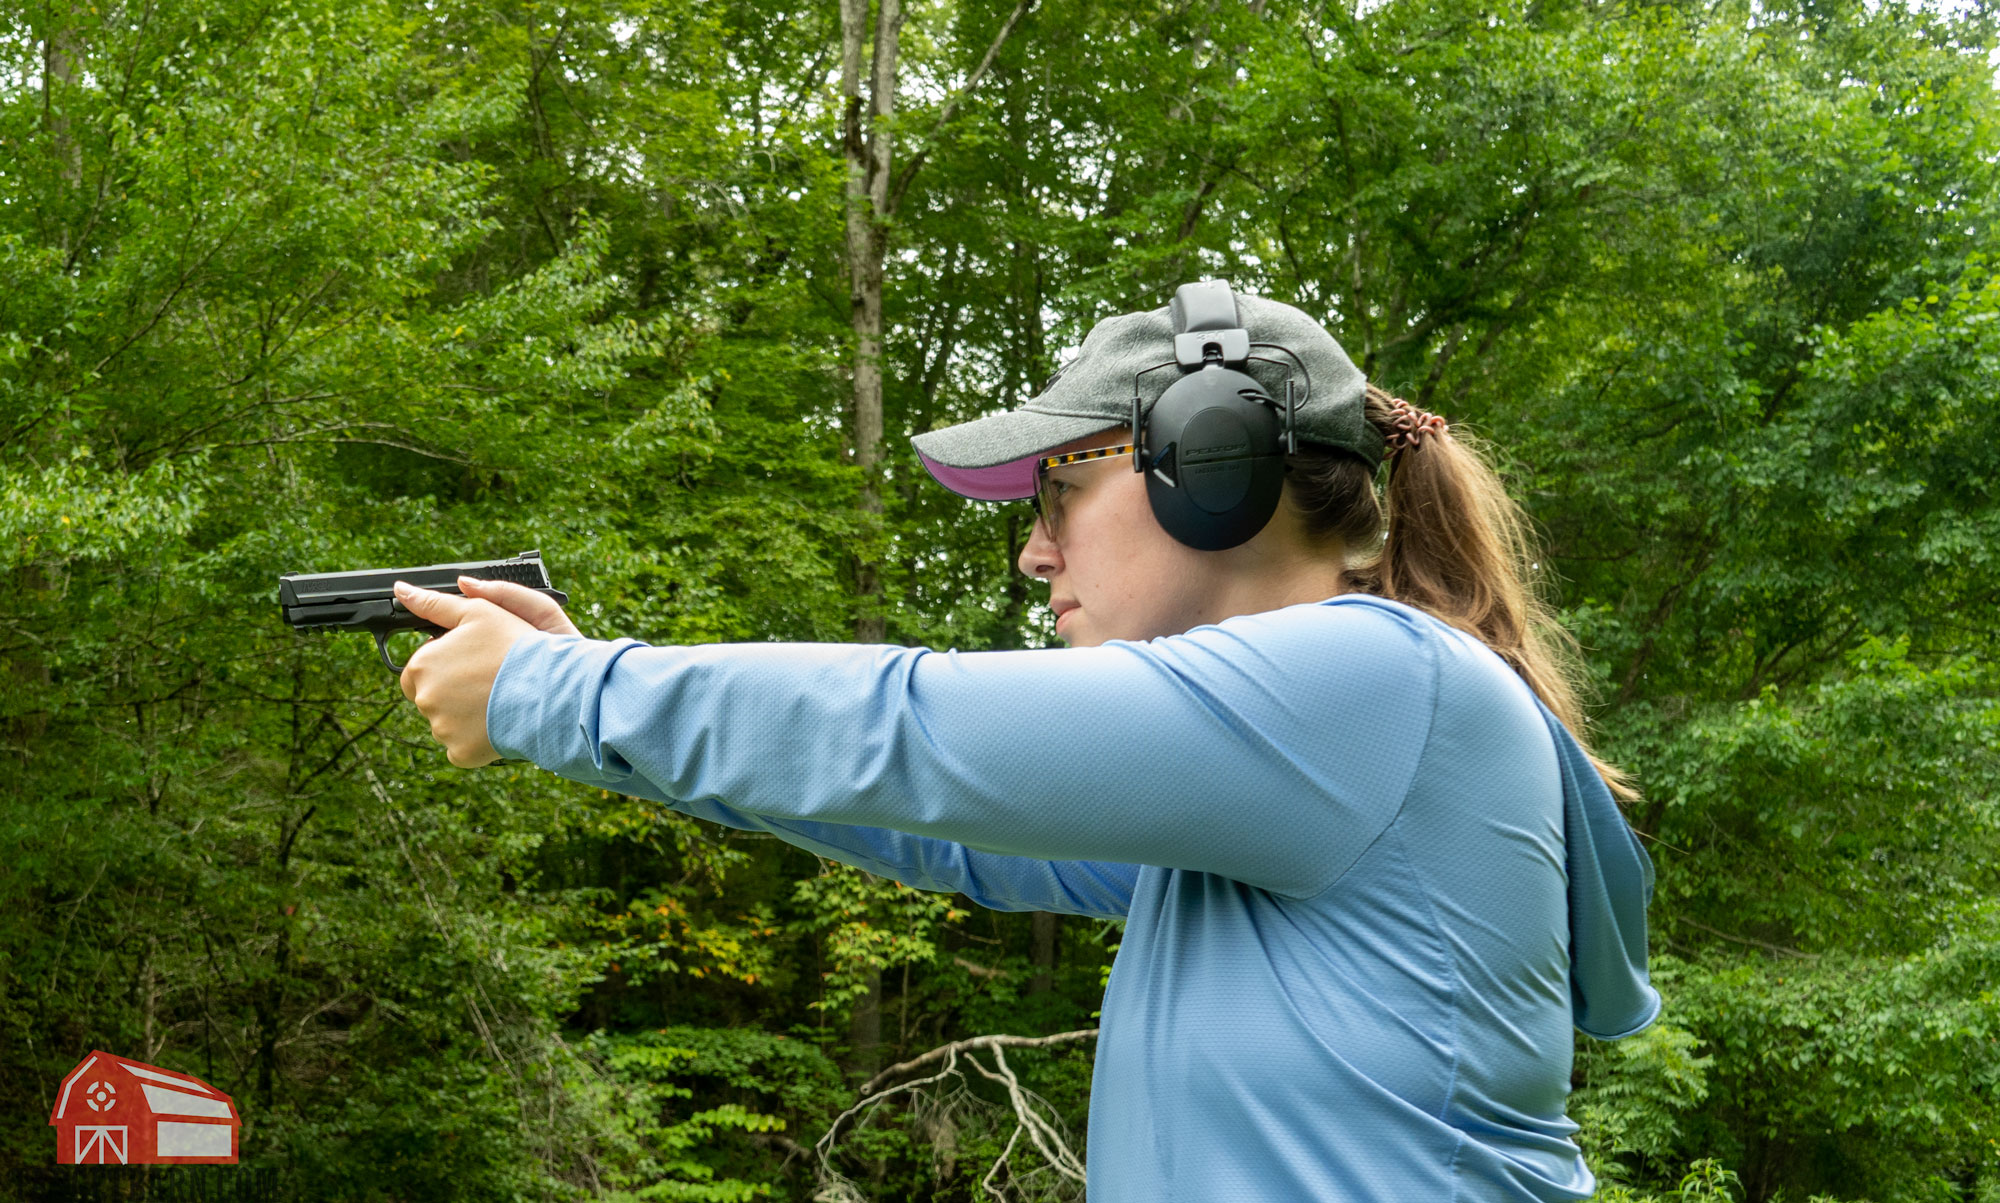 the author shooting a smith & wesson m&p40 pistol